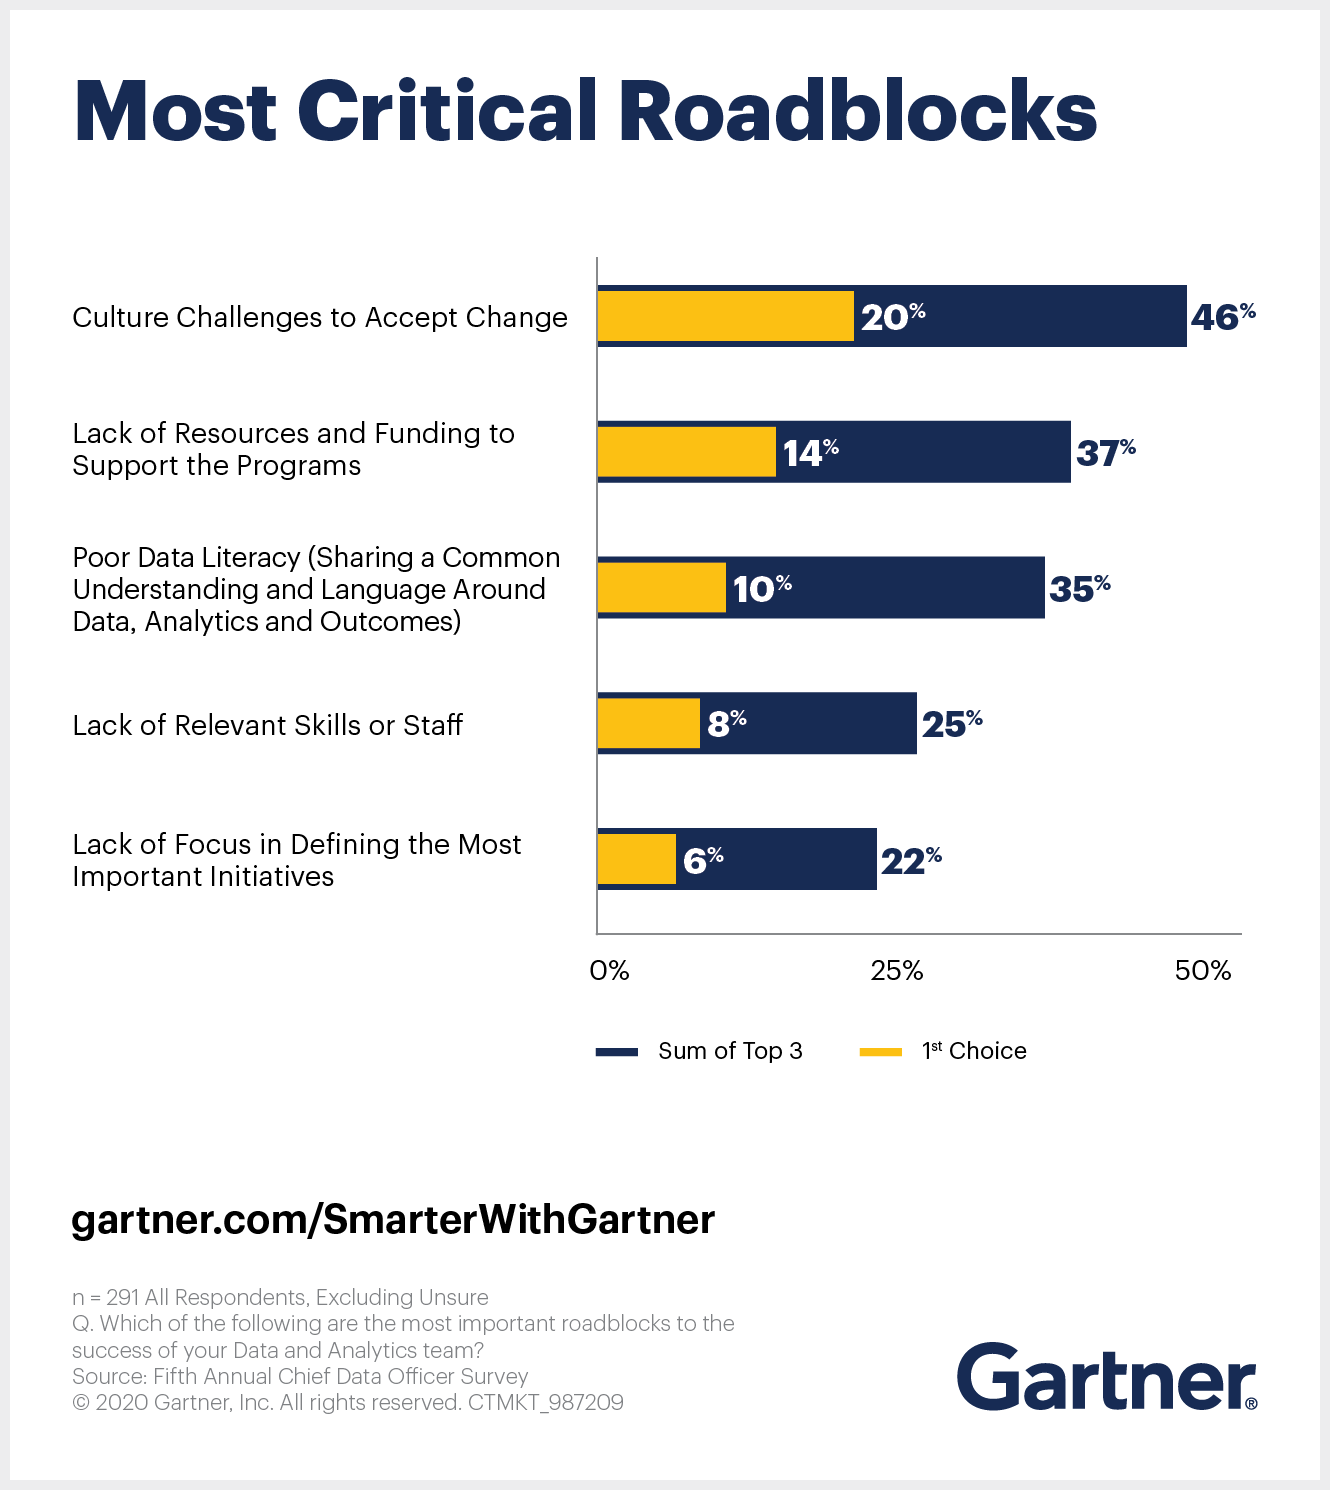 Gartner outlines five critical roadblocks that chief data officers are likely to encounter when establishing data and analytics as a strategic discipline within their organization. 